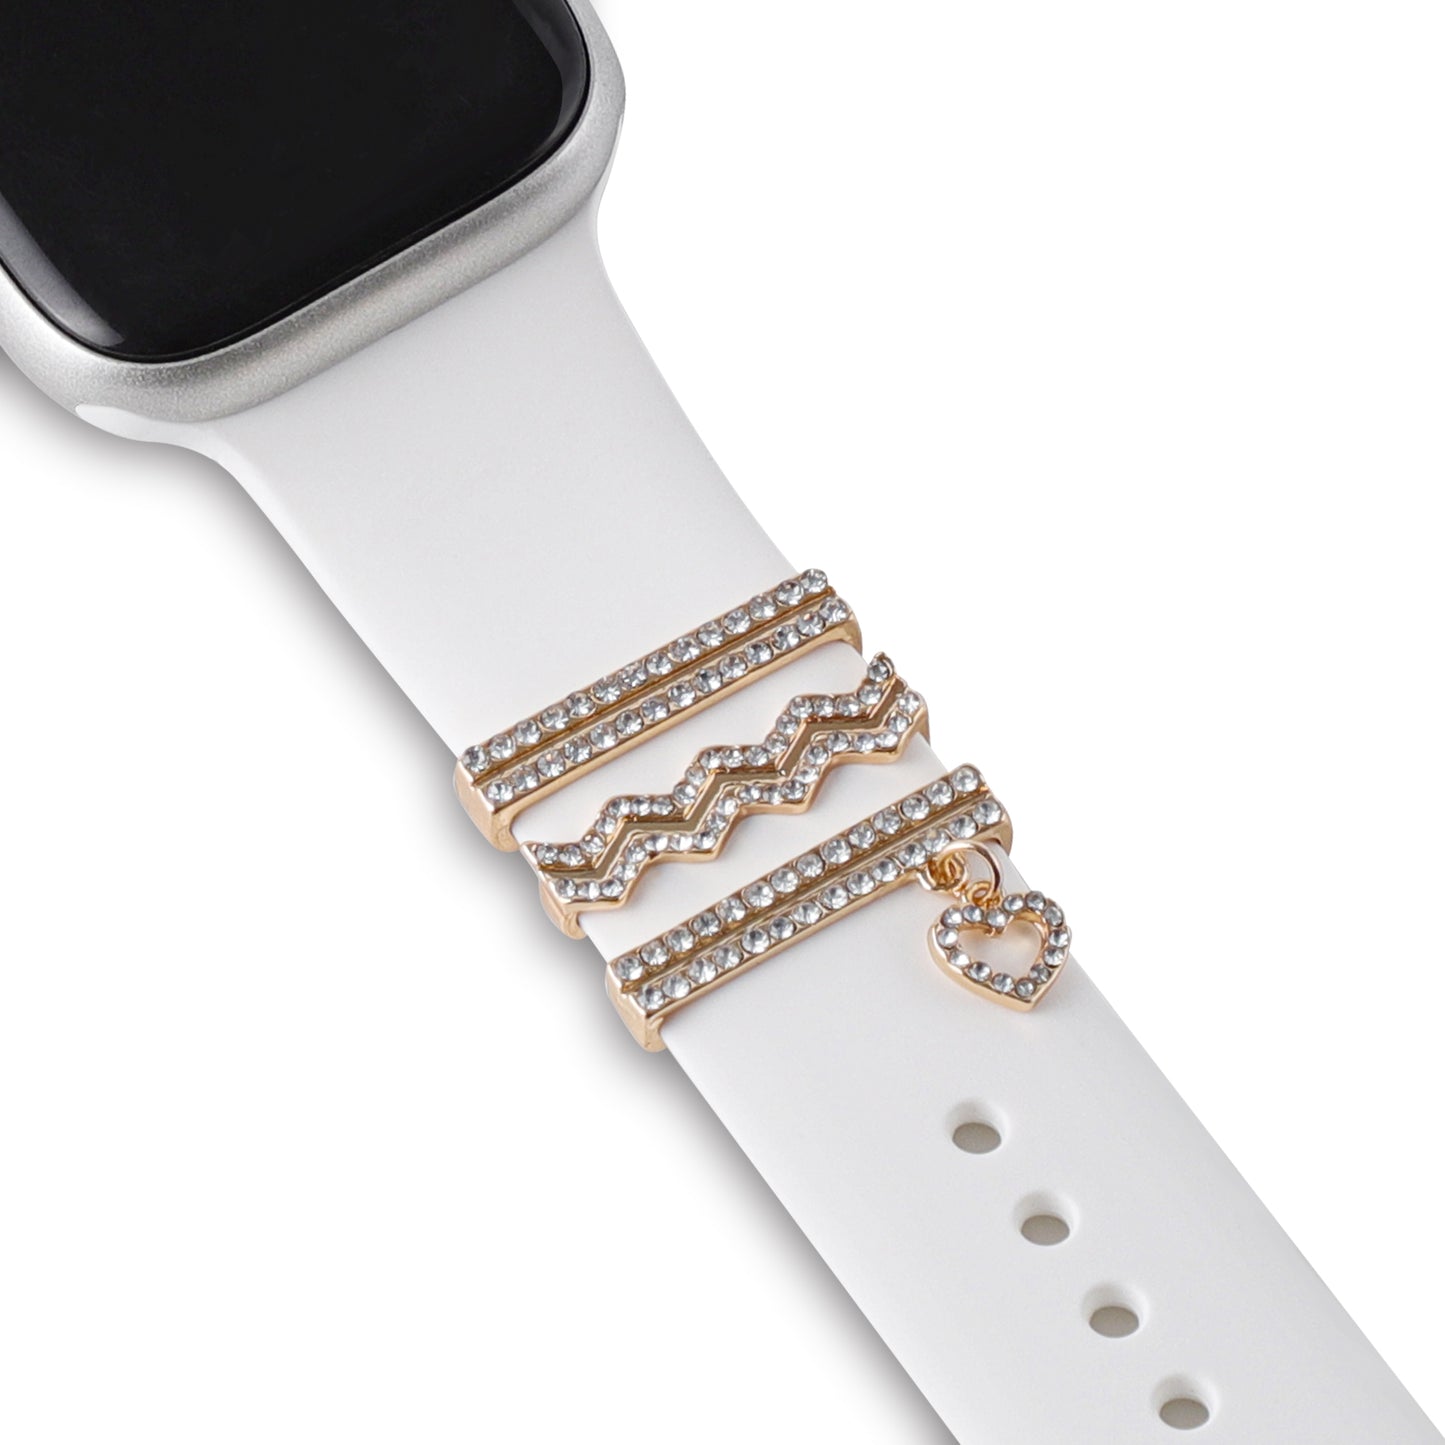 arktisband Apple Watch Charms "Hanging Heart"